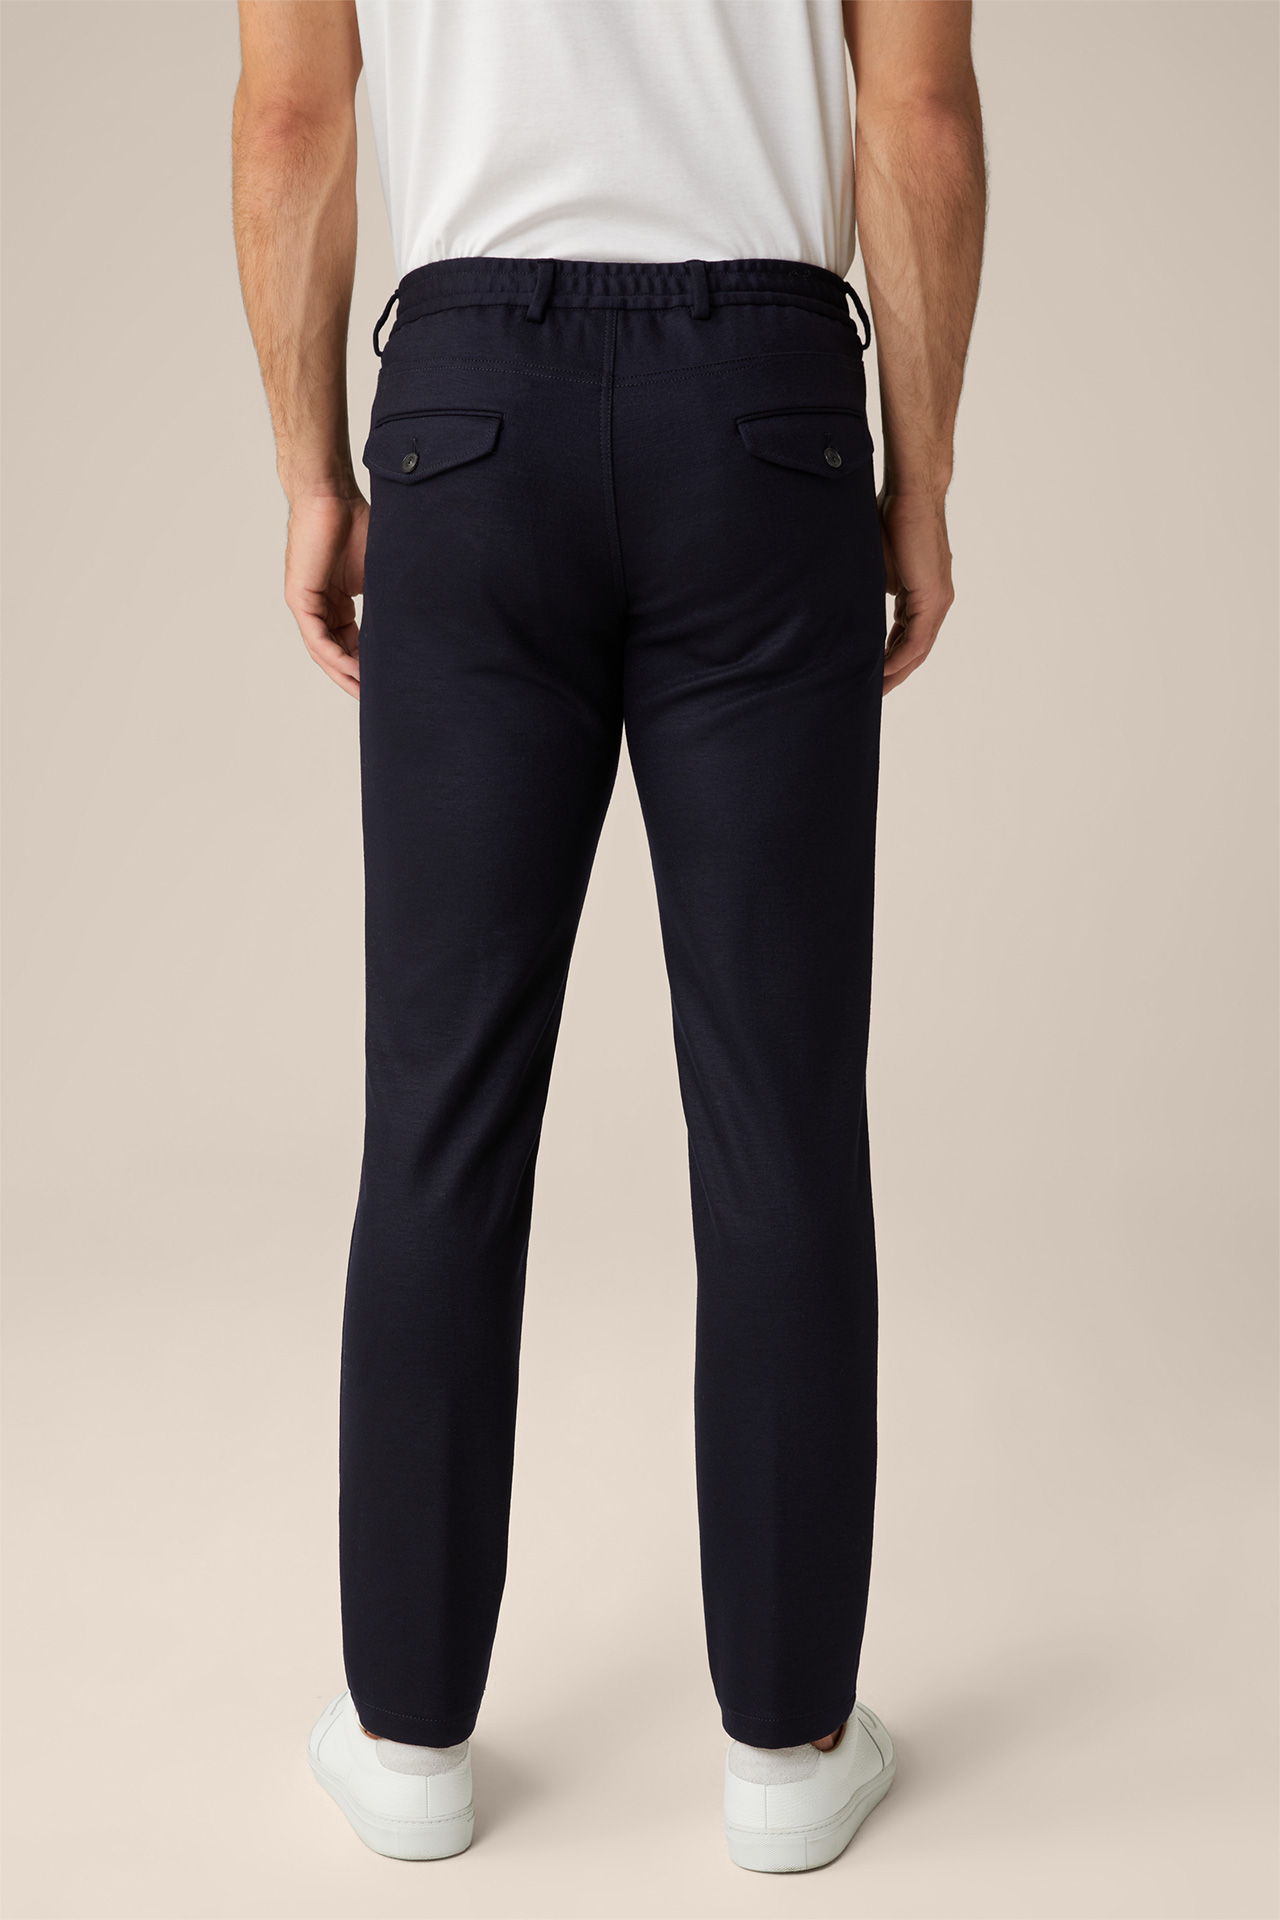 Floro Wool Jersey Pleated Trousers in Navy